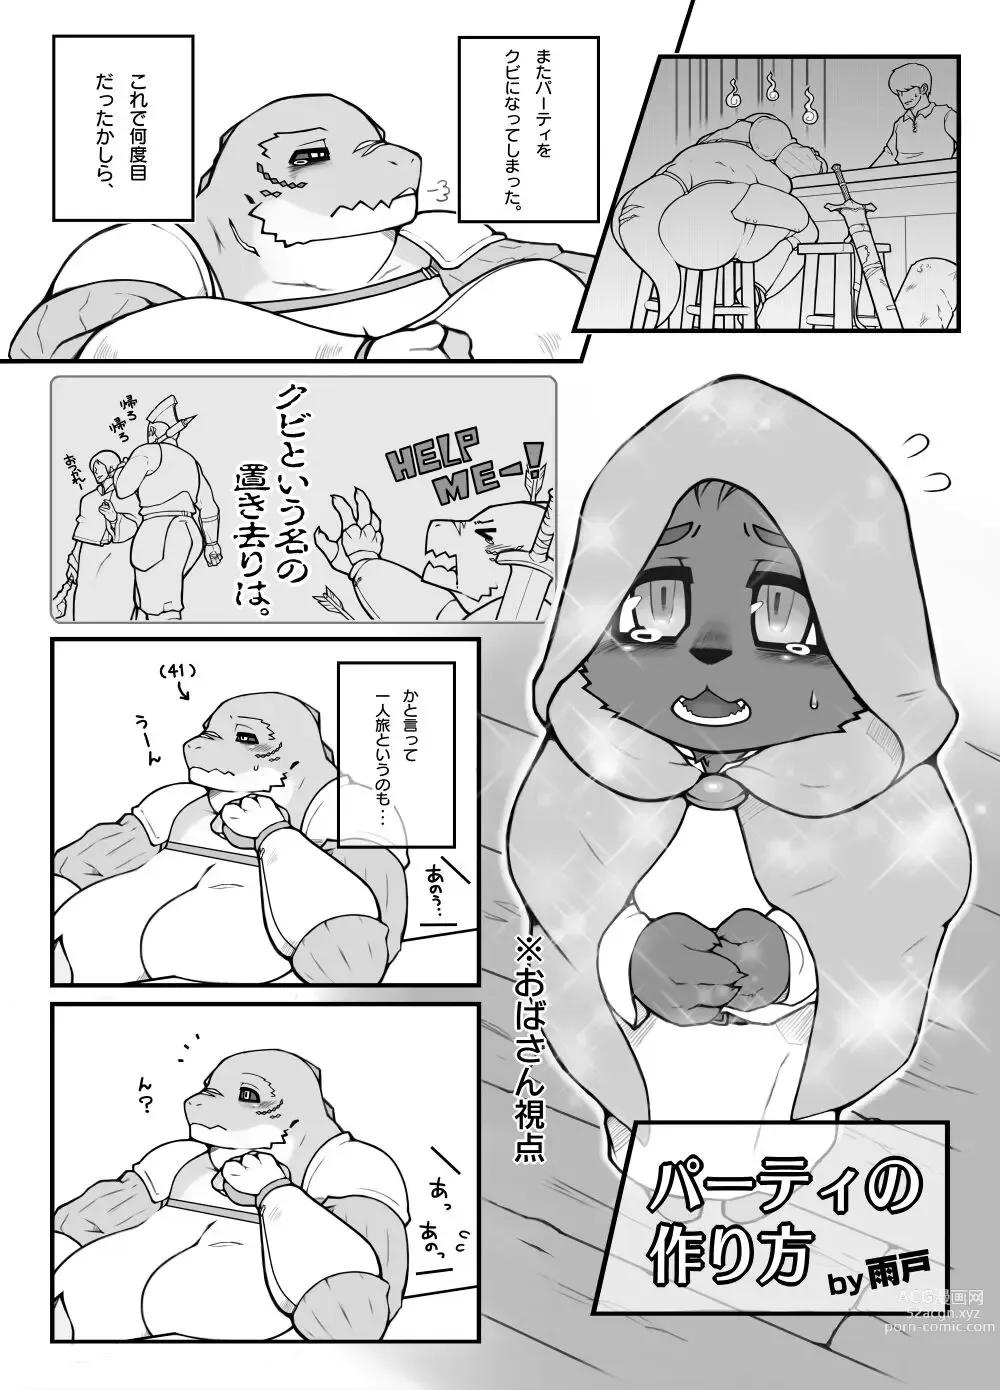 Page 1 of doujinshi How to Form An Adventurers Party